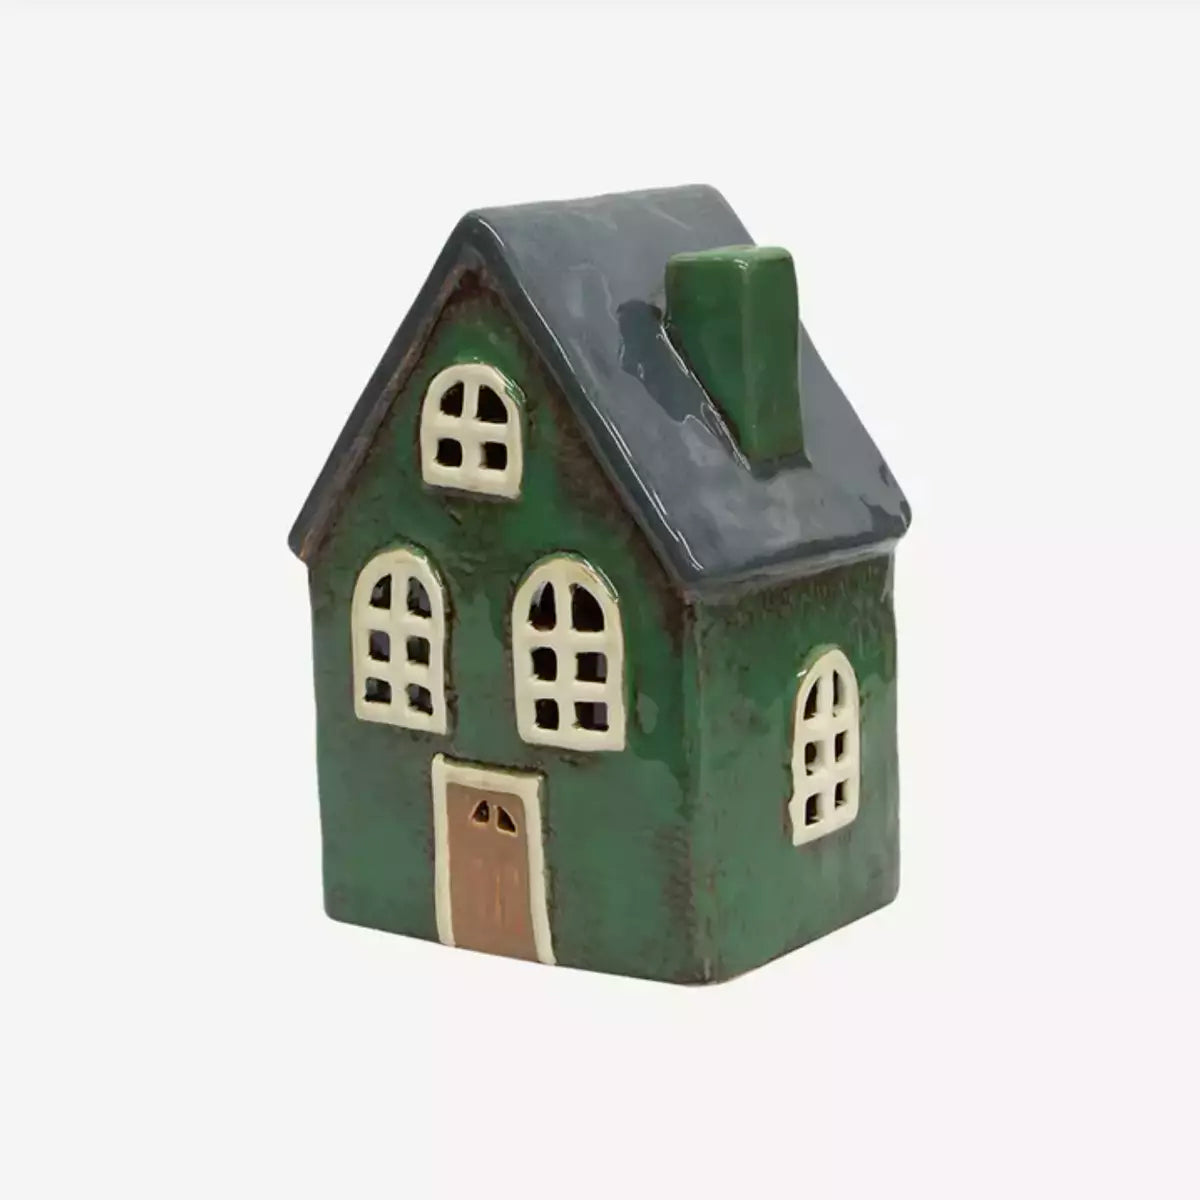 A small French Country Collections Christmas Village Barn - Green on a white background.